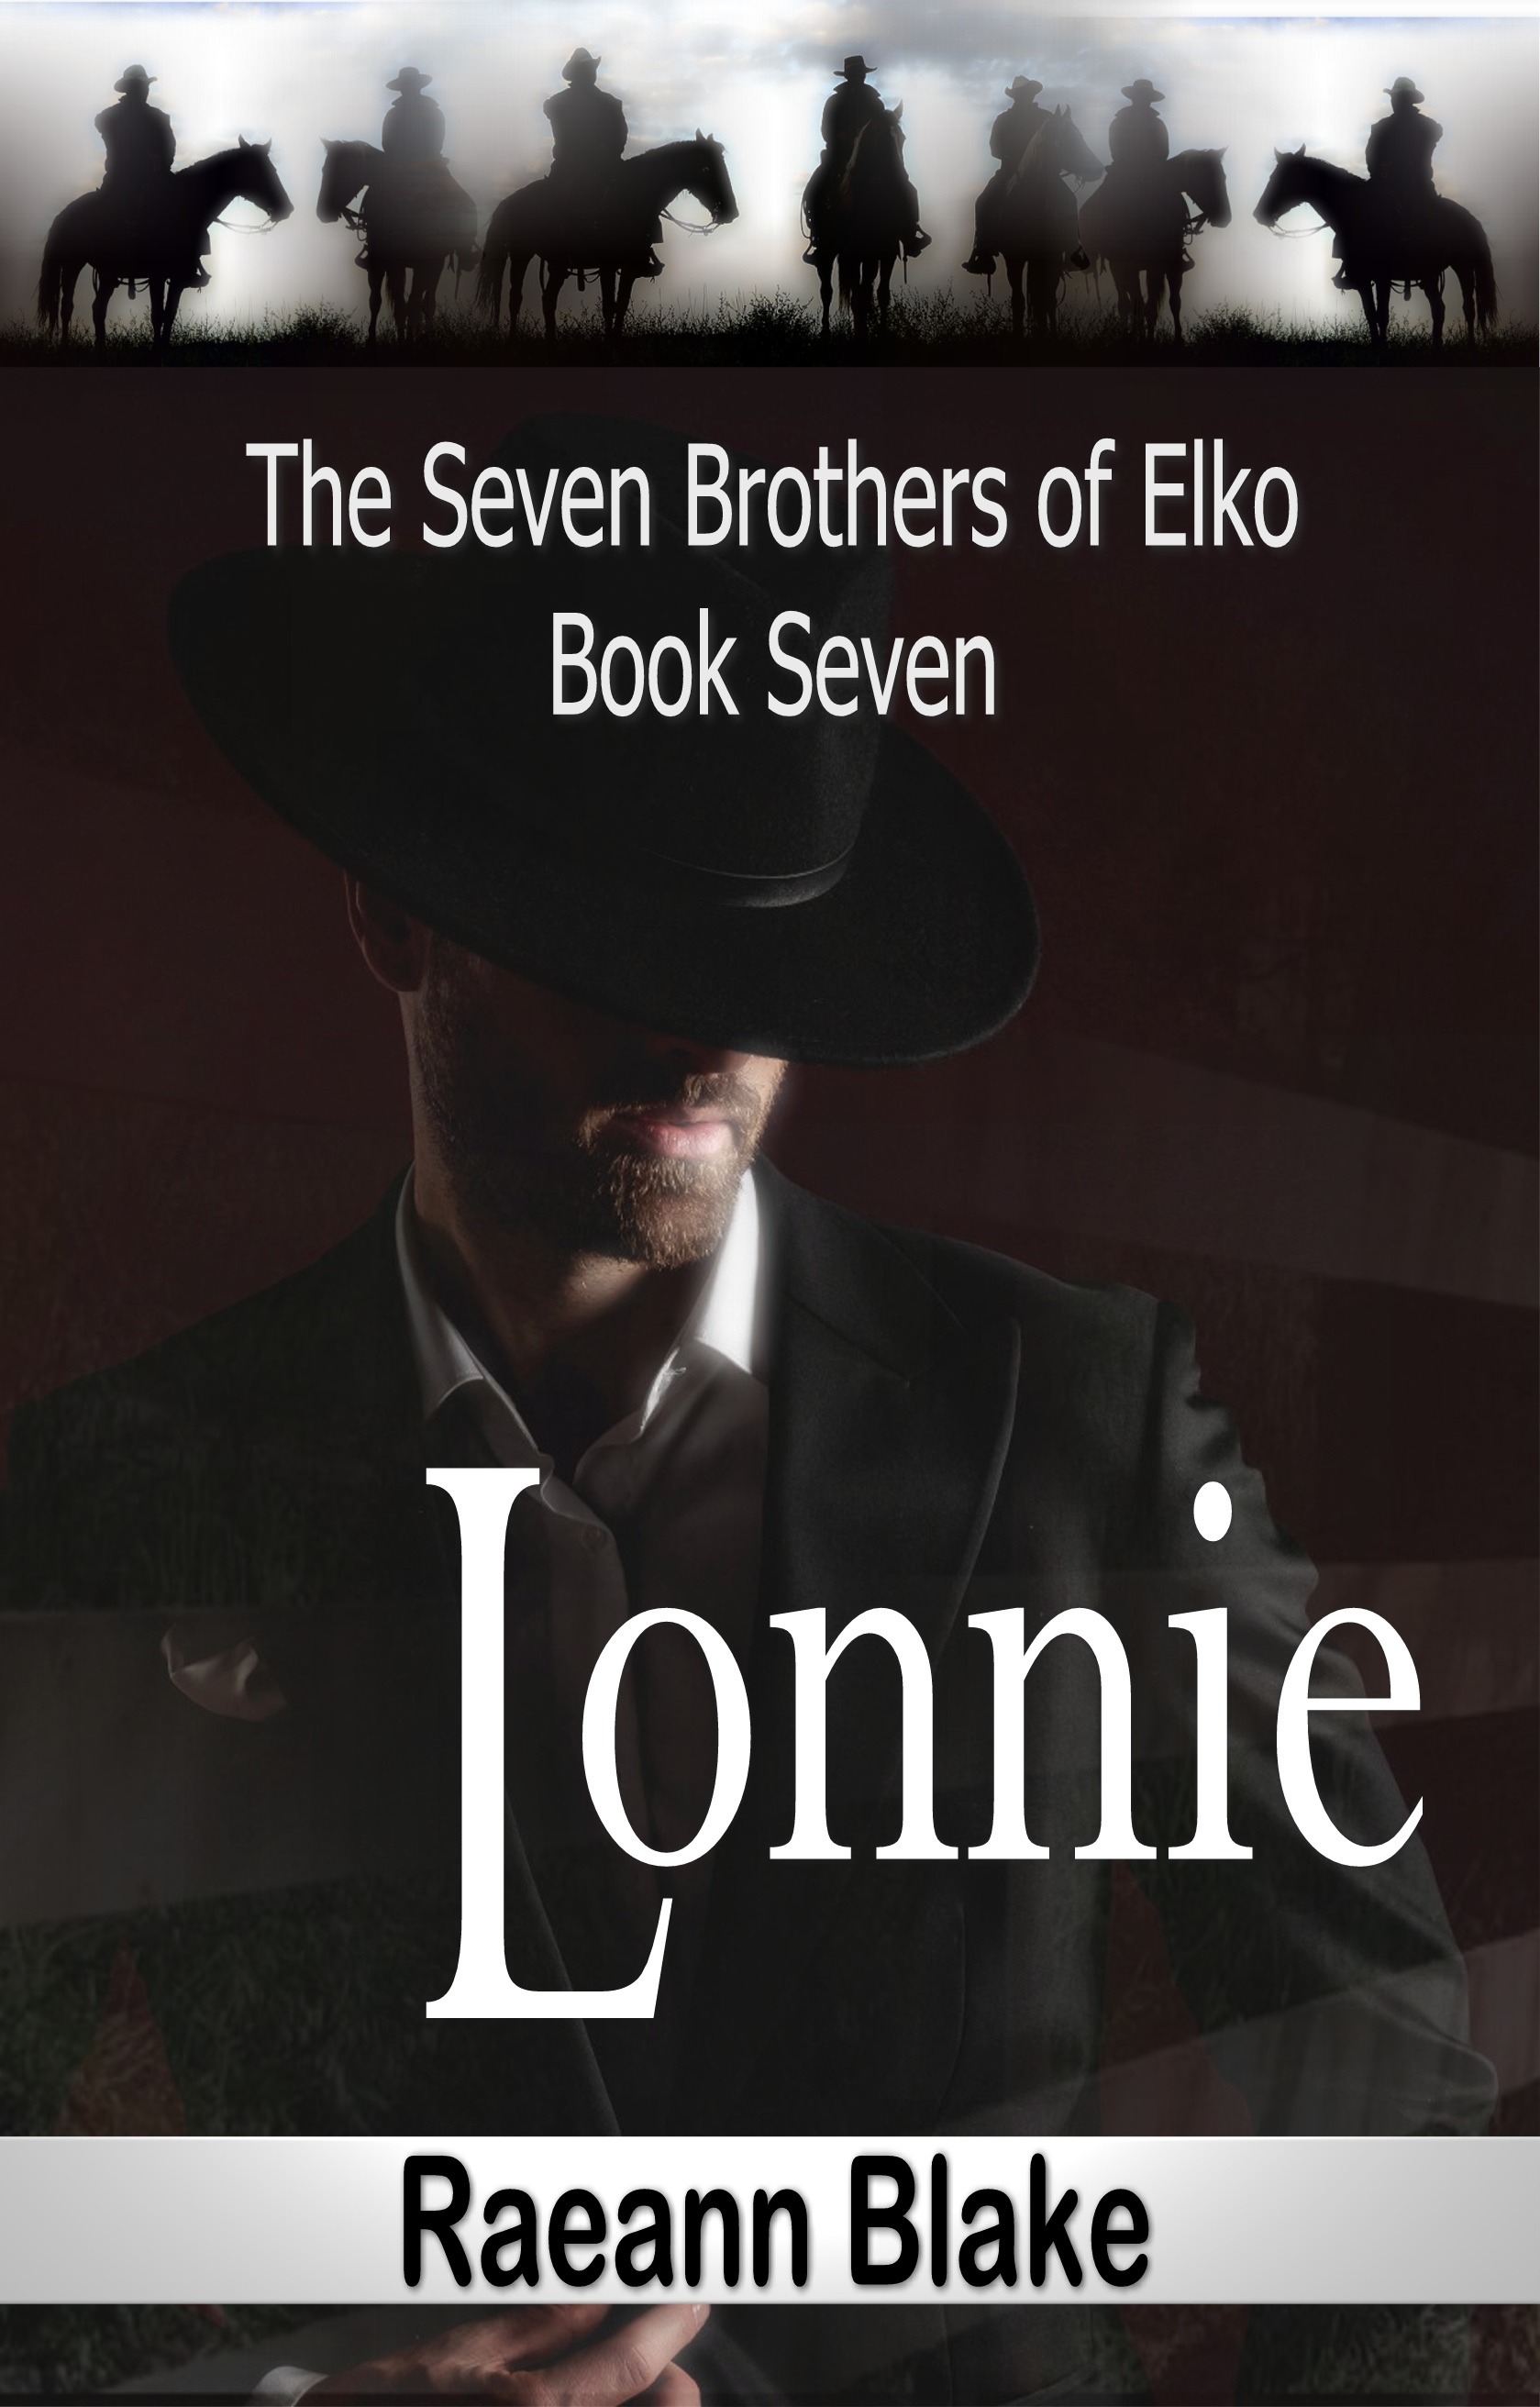 The Seven Brothers of Elko - Lonnie